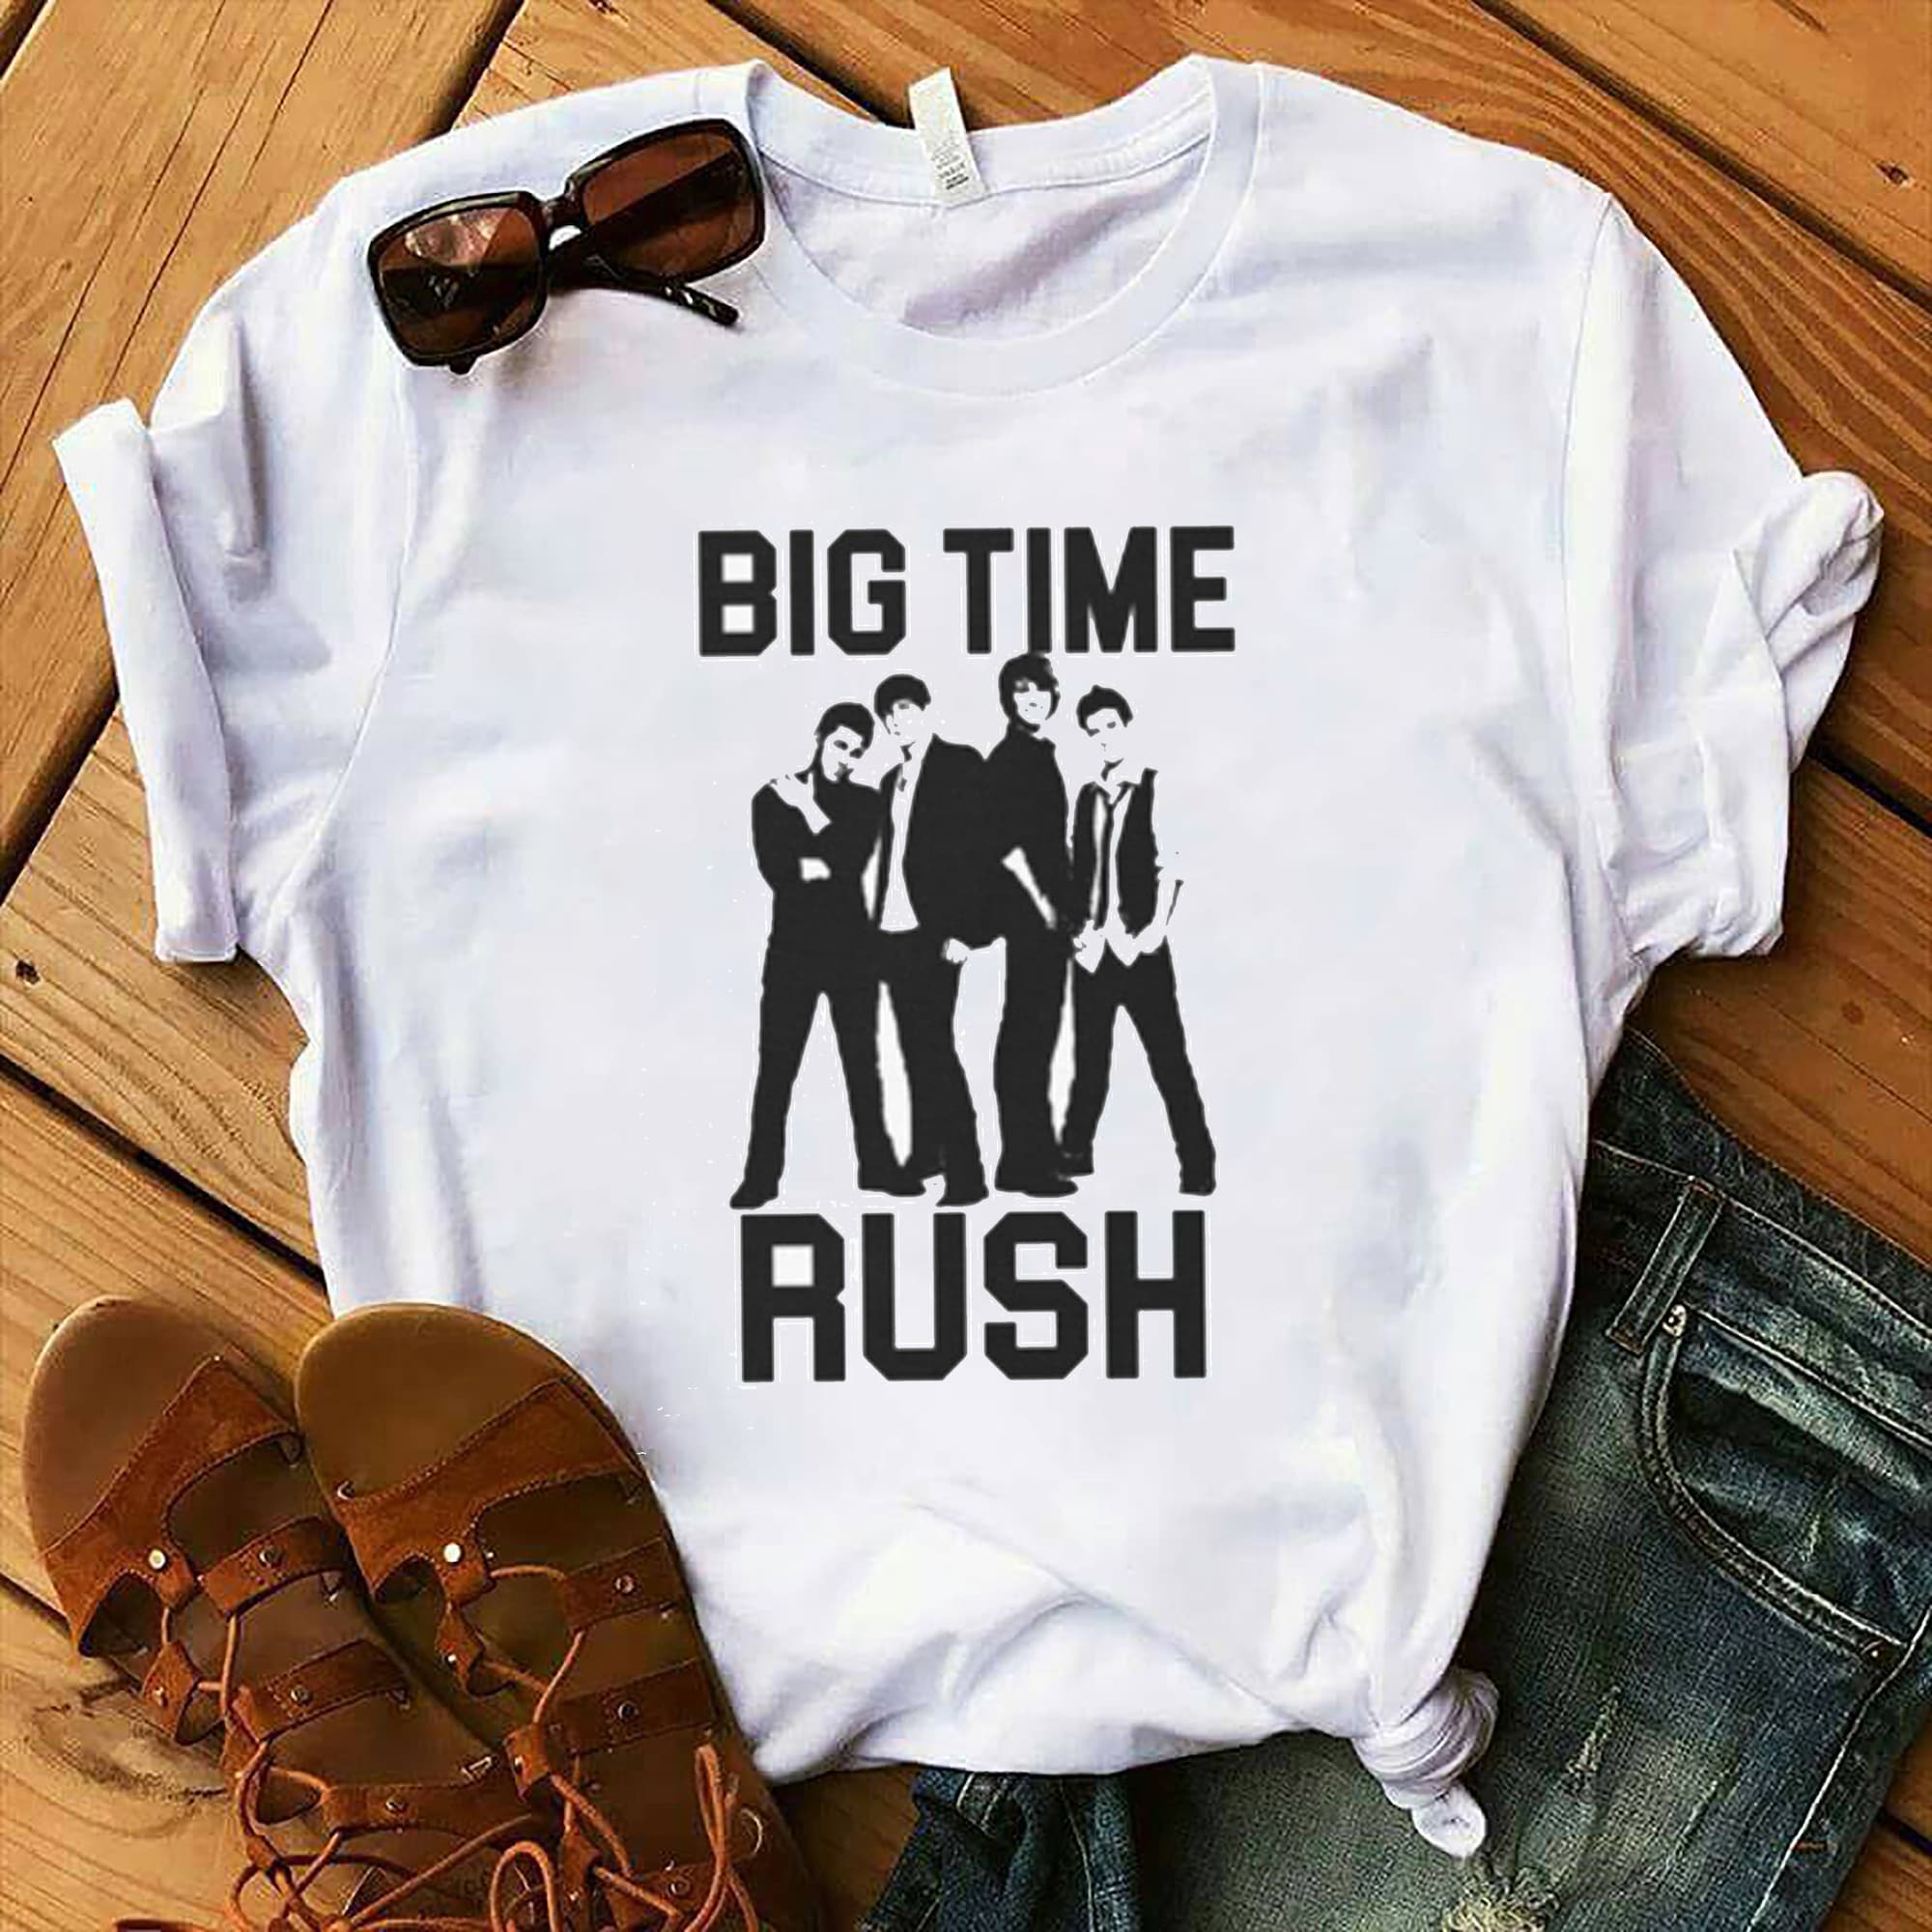 Discover Big Time Rush shirt, The Band Is Back Tee, Big Time Rush, BTR, Big Time Rush Reunion